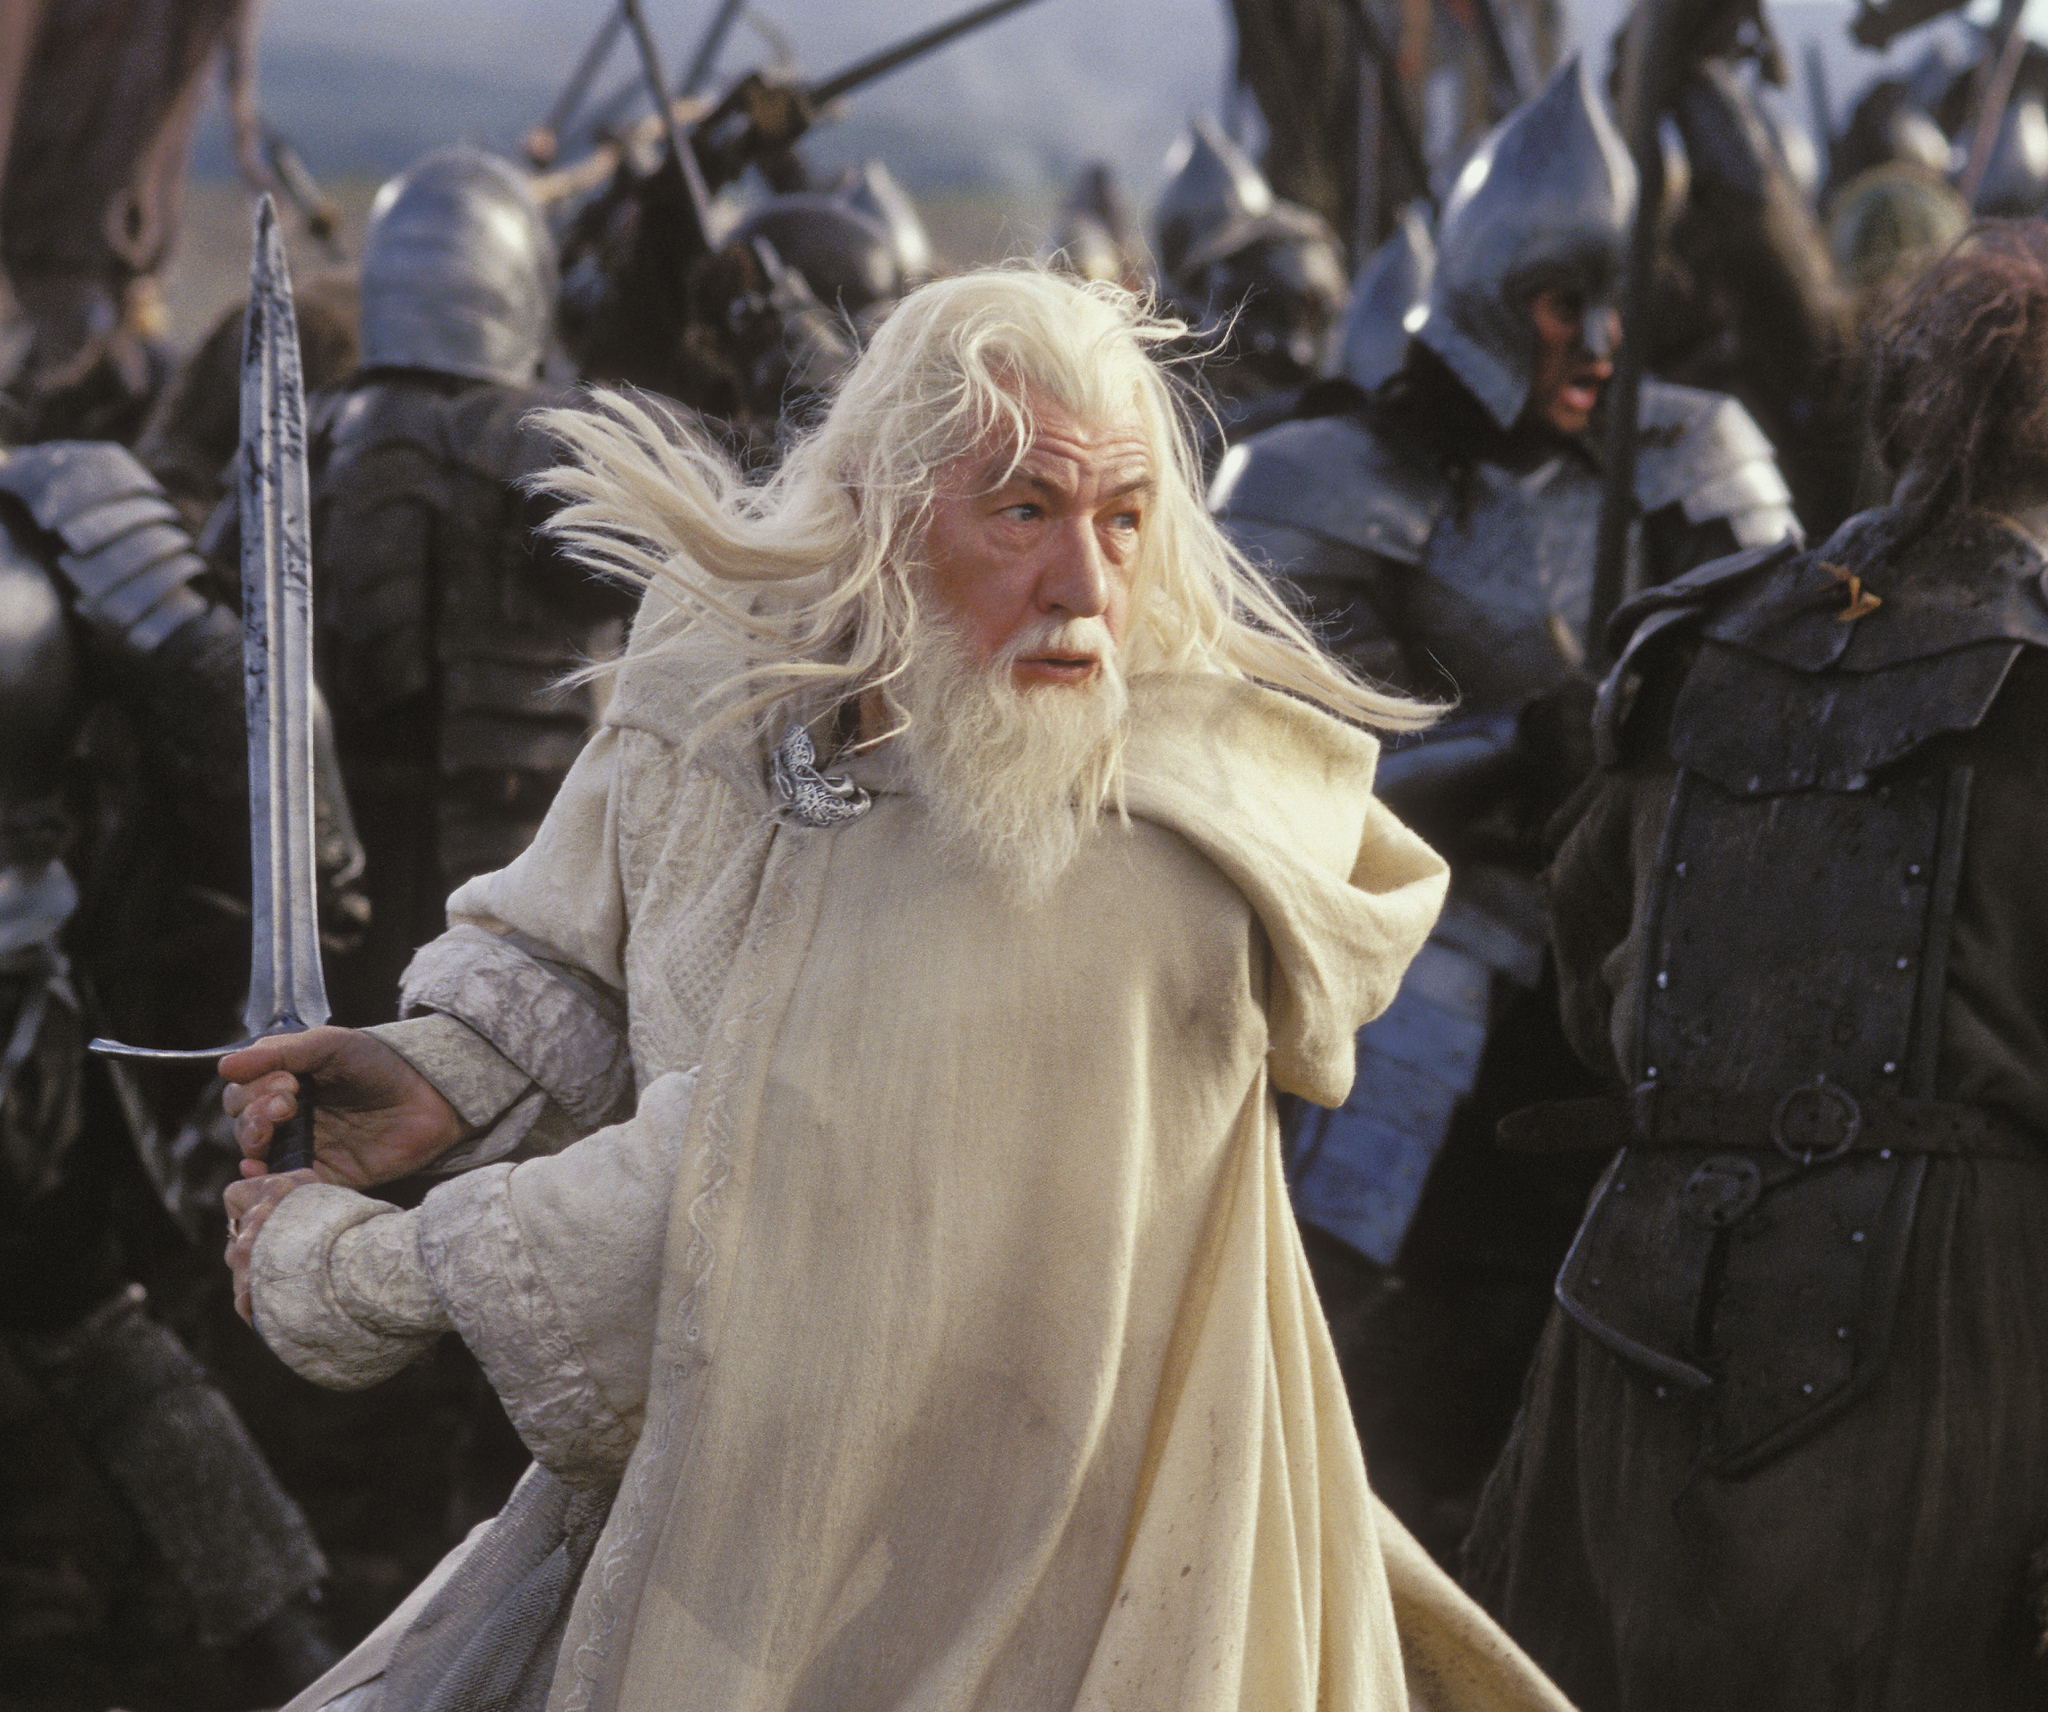 Ian McKellen in The Lord of the Rings: The Return of the King (2003)